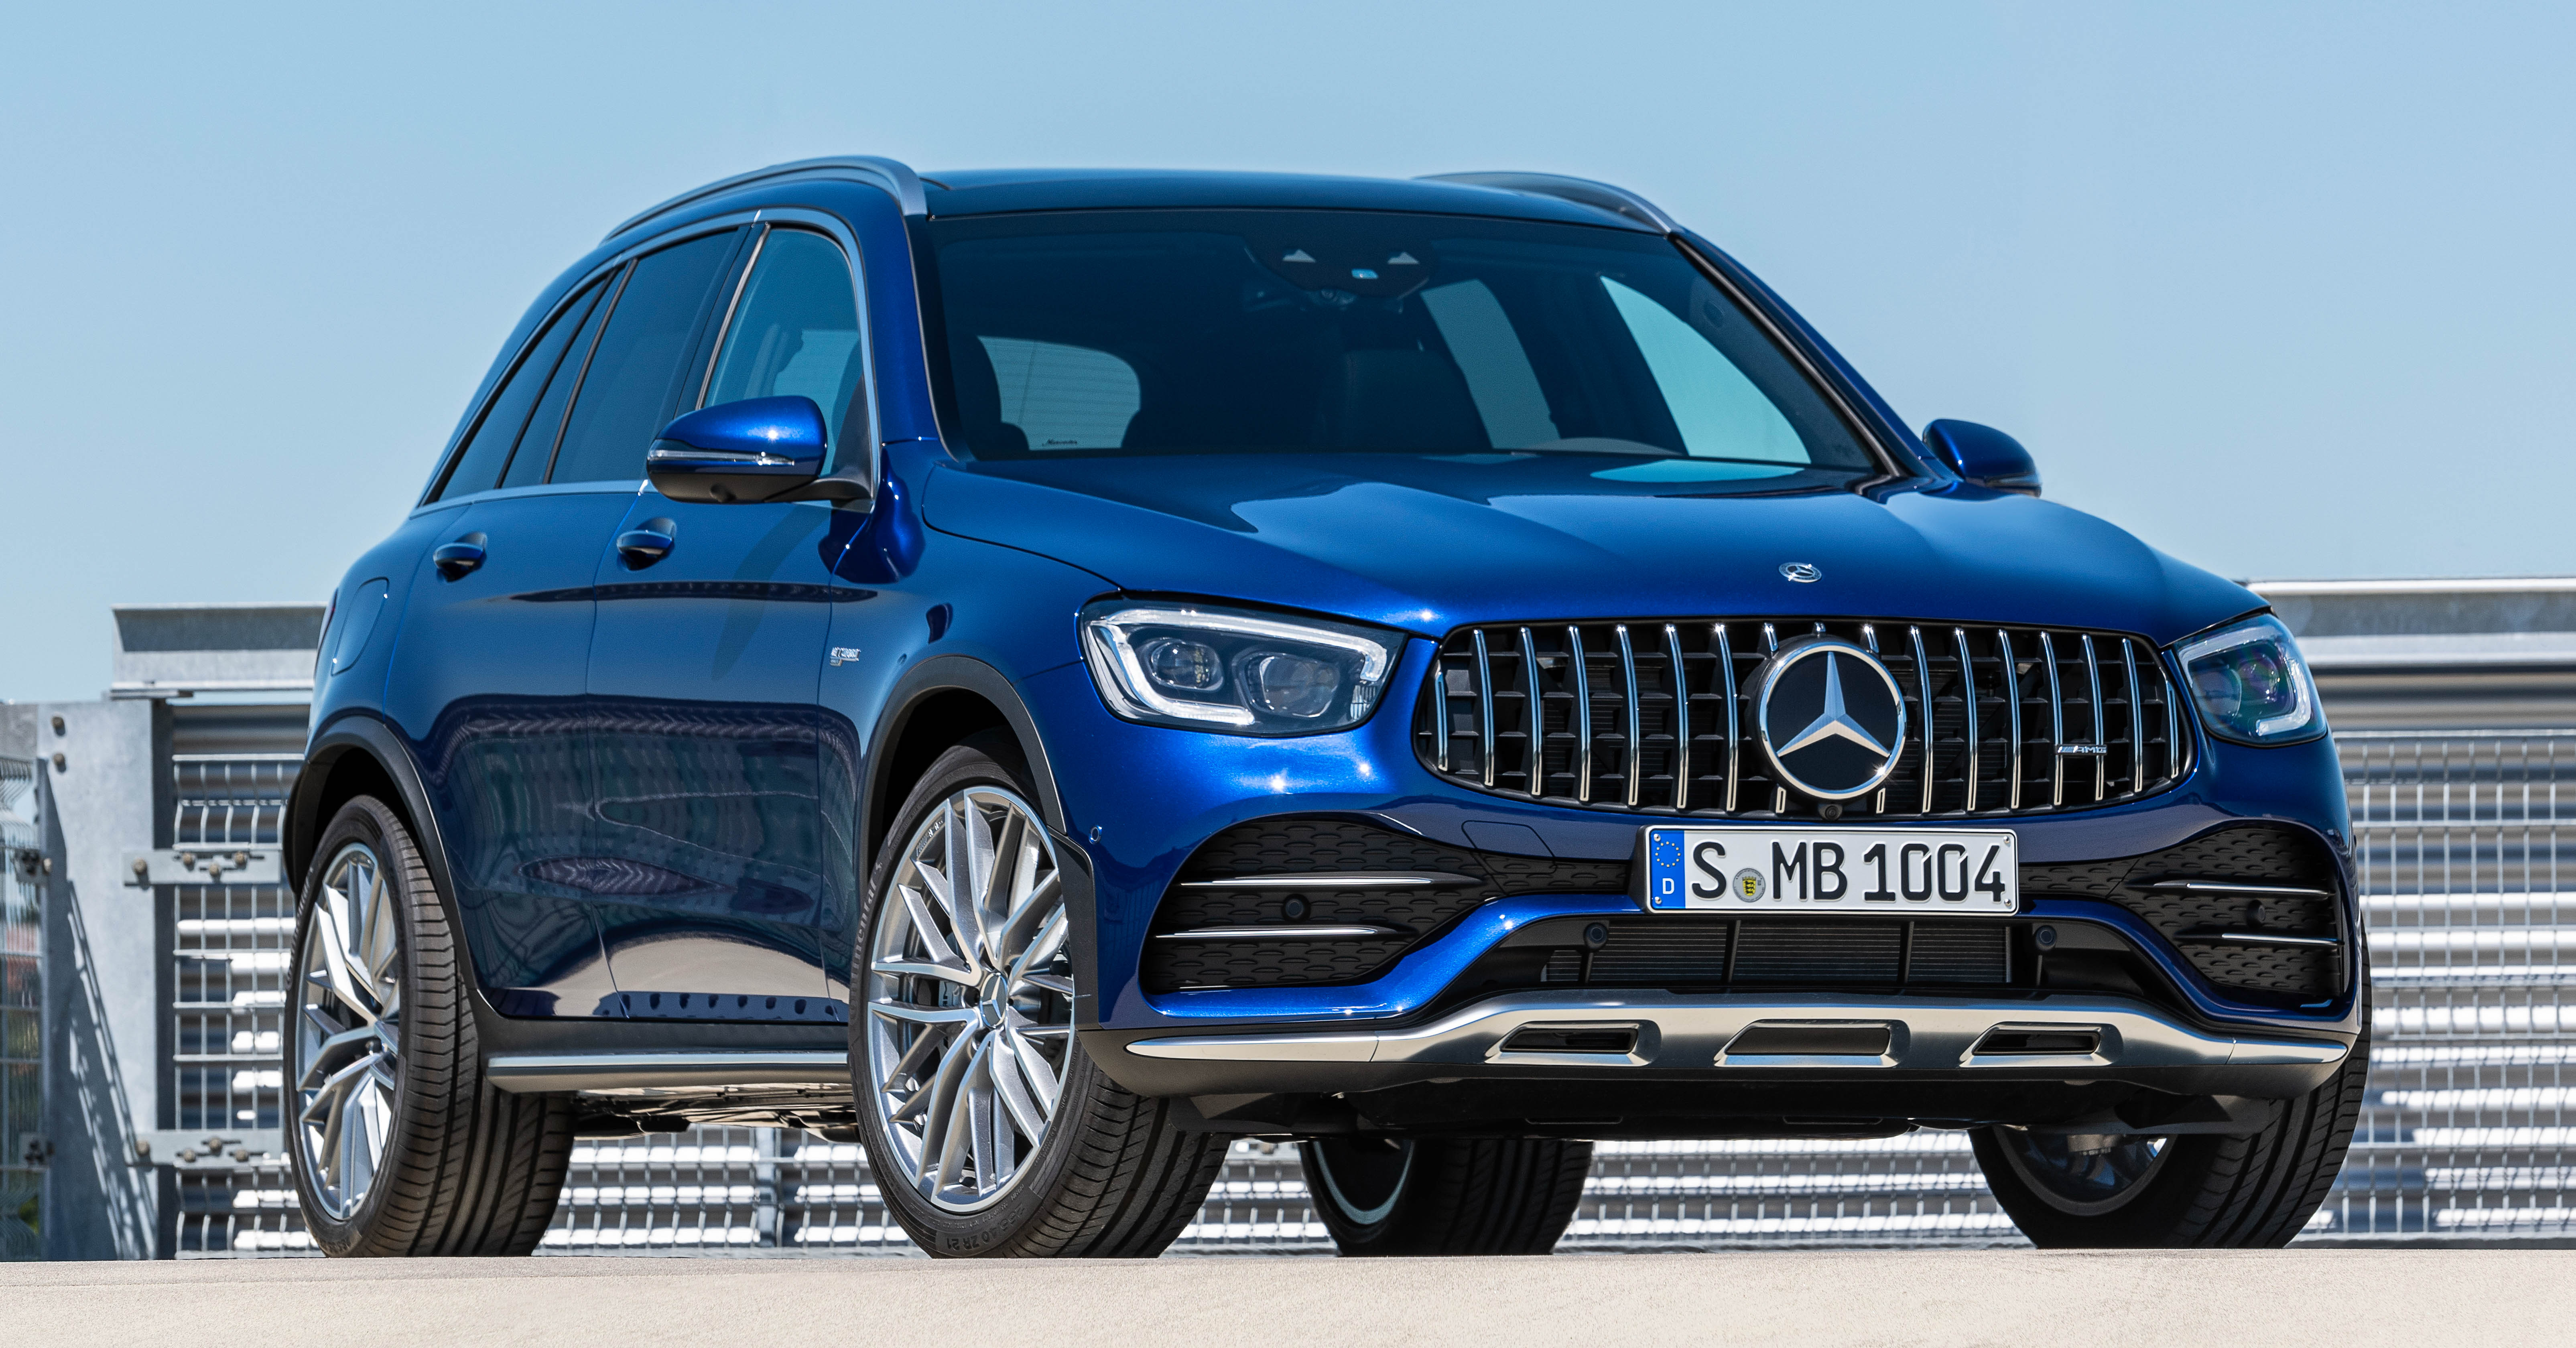 Mercedes GLC-Class Coupe (X253) modern specifications